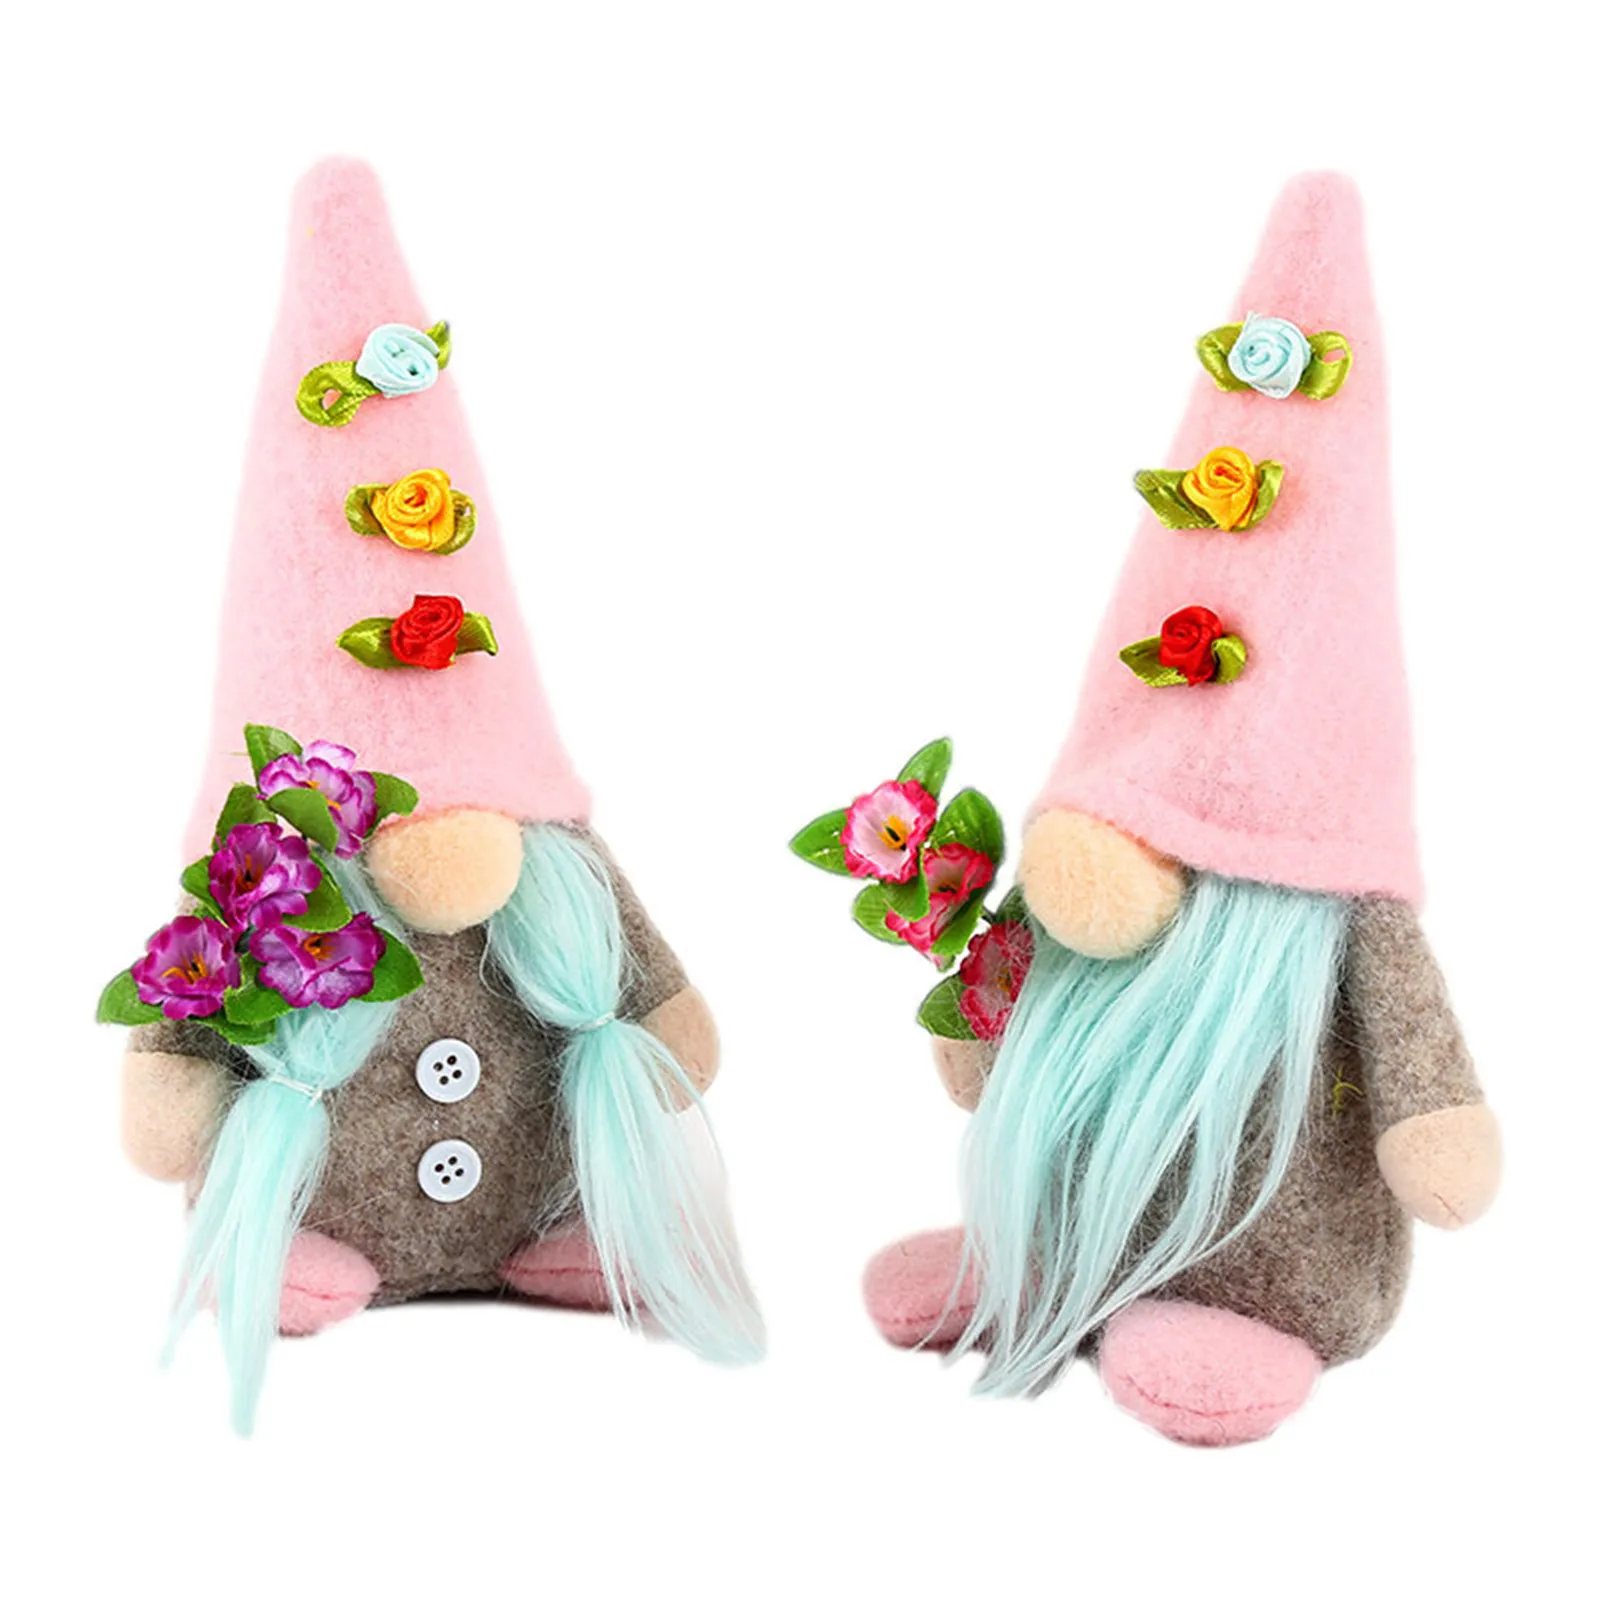 

Cute Faceless Doll Wearing High Hat Cute Gnomes Decor Gift Gnome Old Man Holding Flowers Doll Mothers Day Gifts